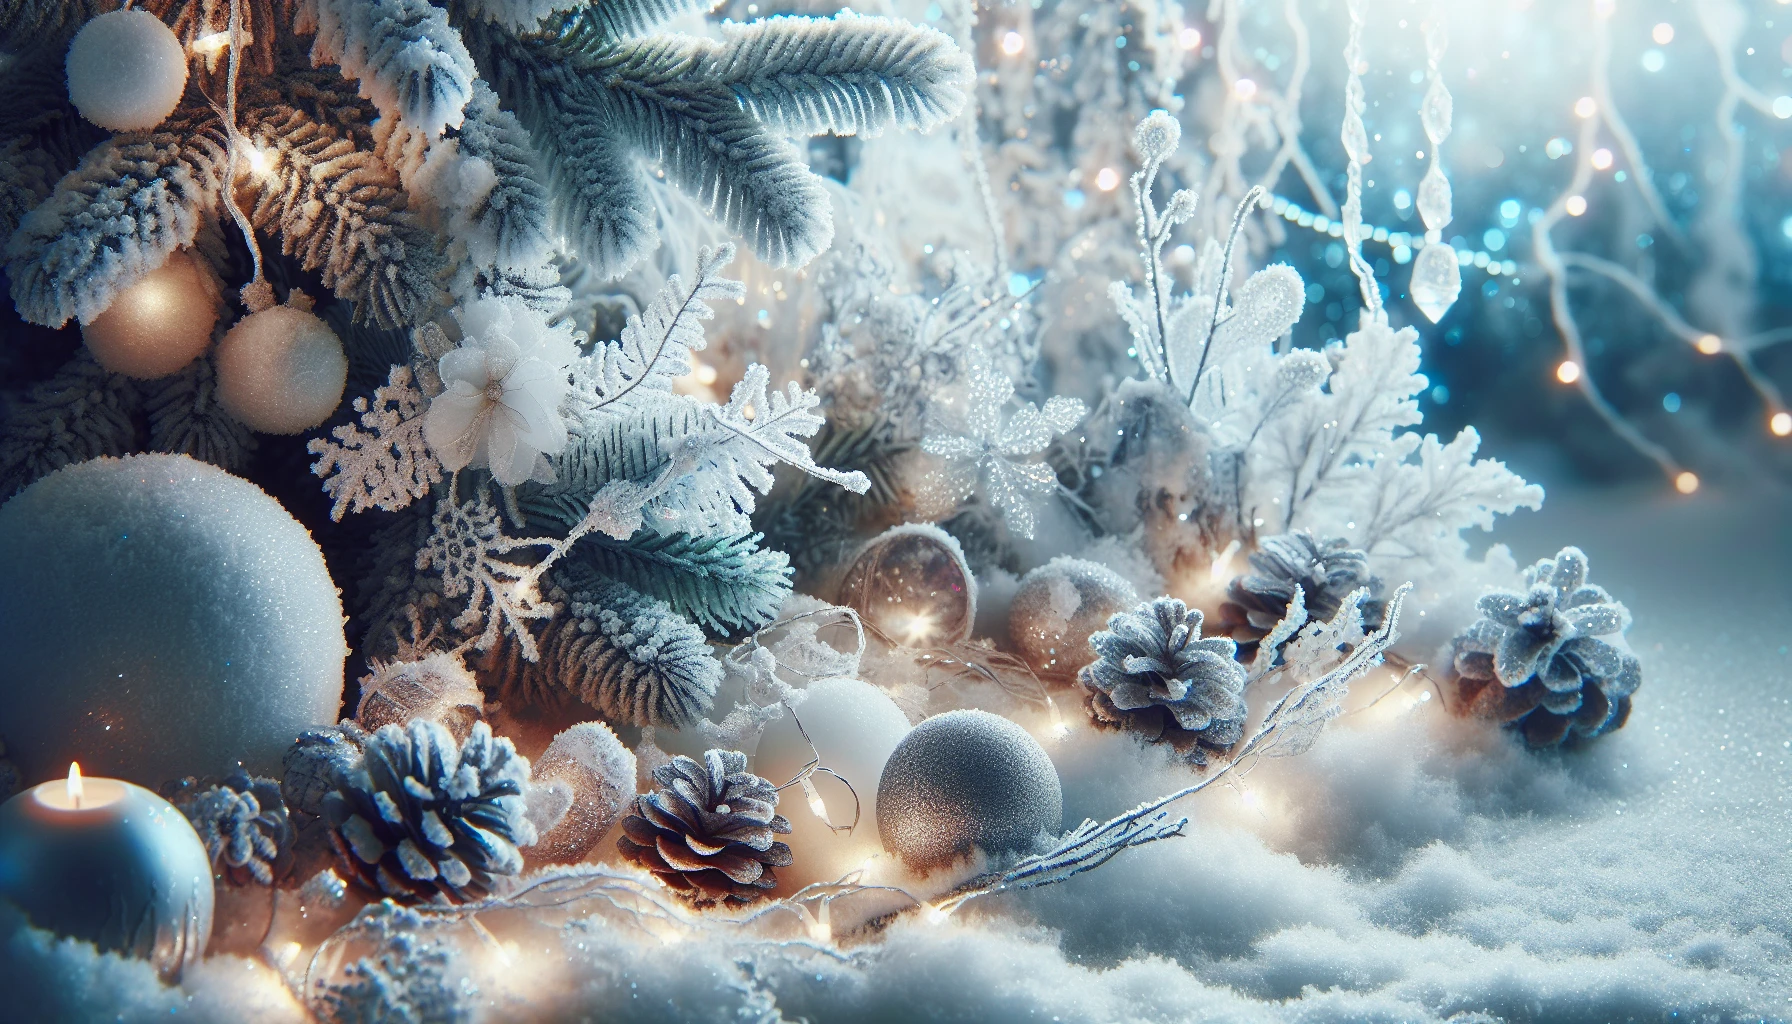 A magical winter wonderland with snowy decor and sparkly accents